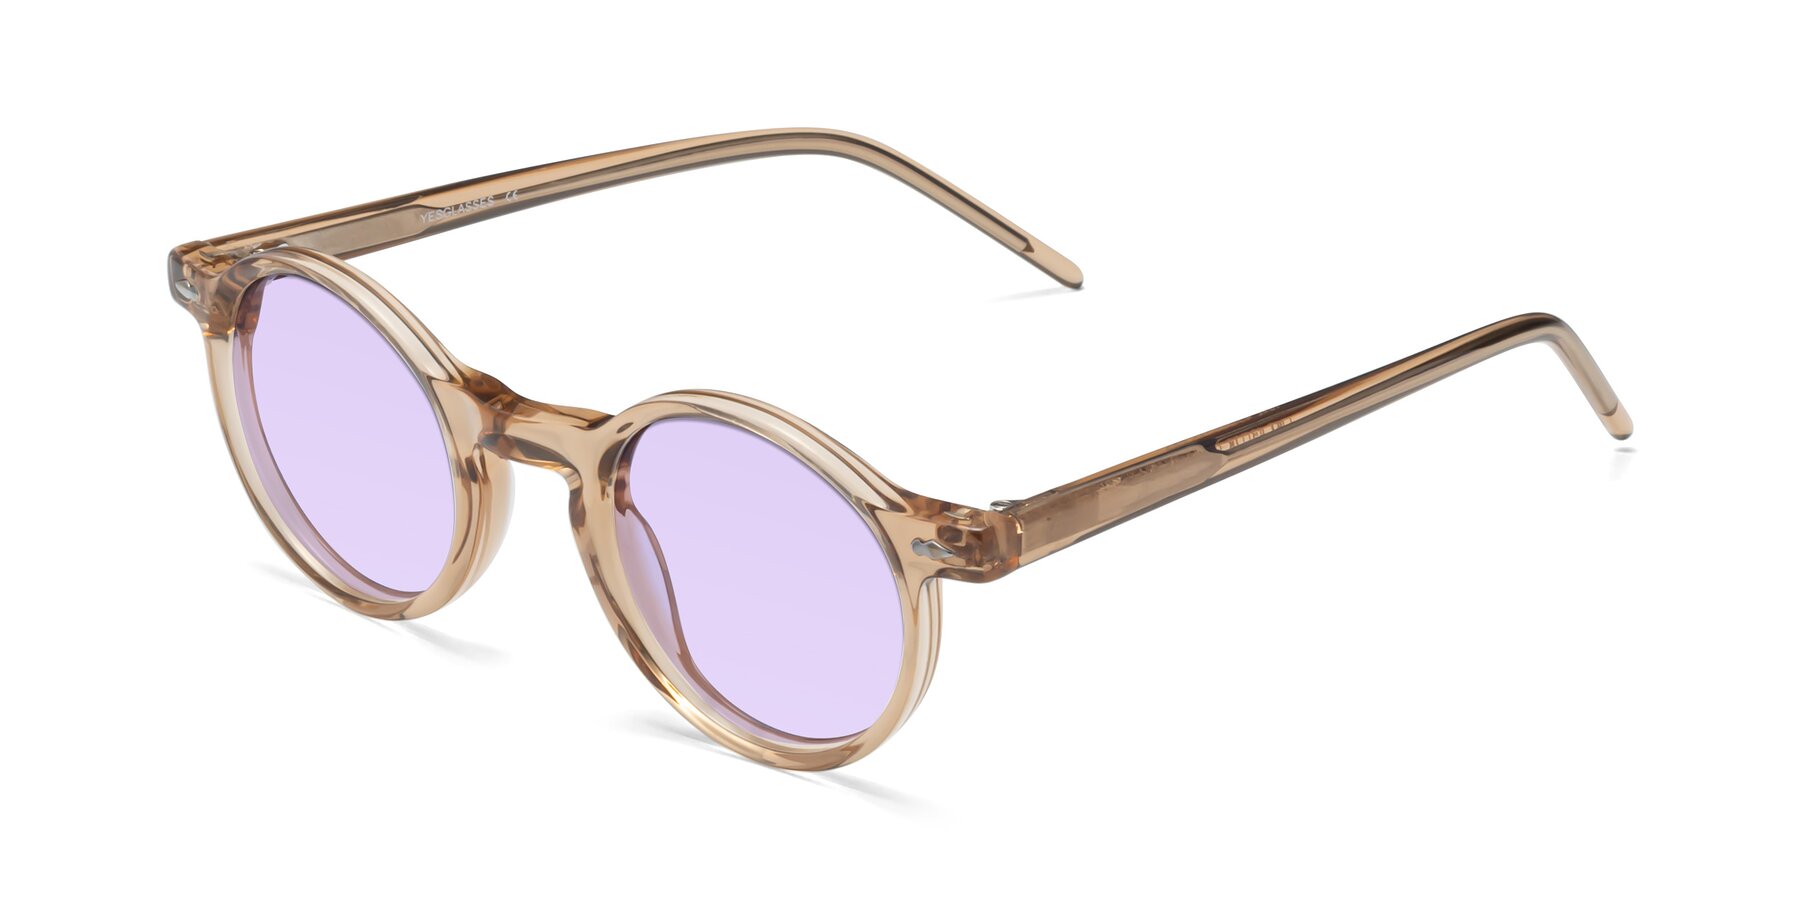 Angle of 1542 in Caramel with Light Purple Tinted Lenses